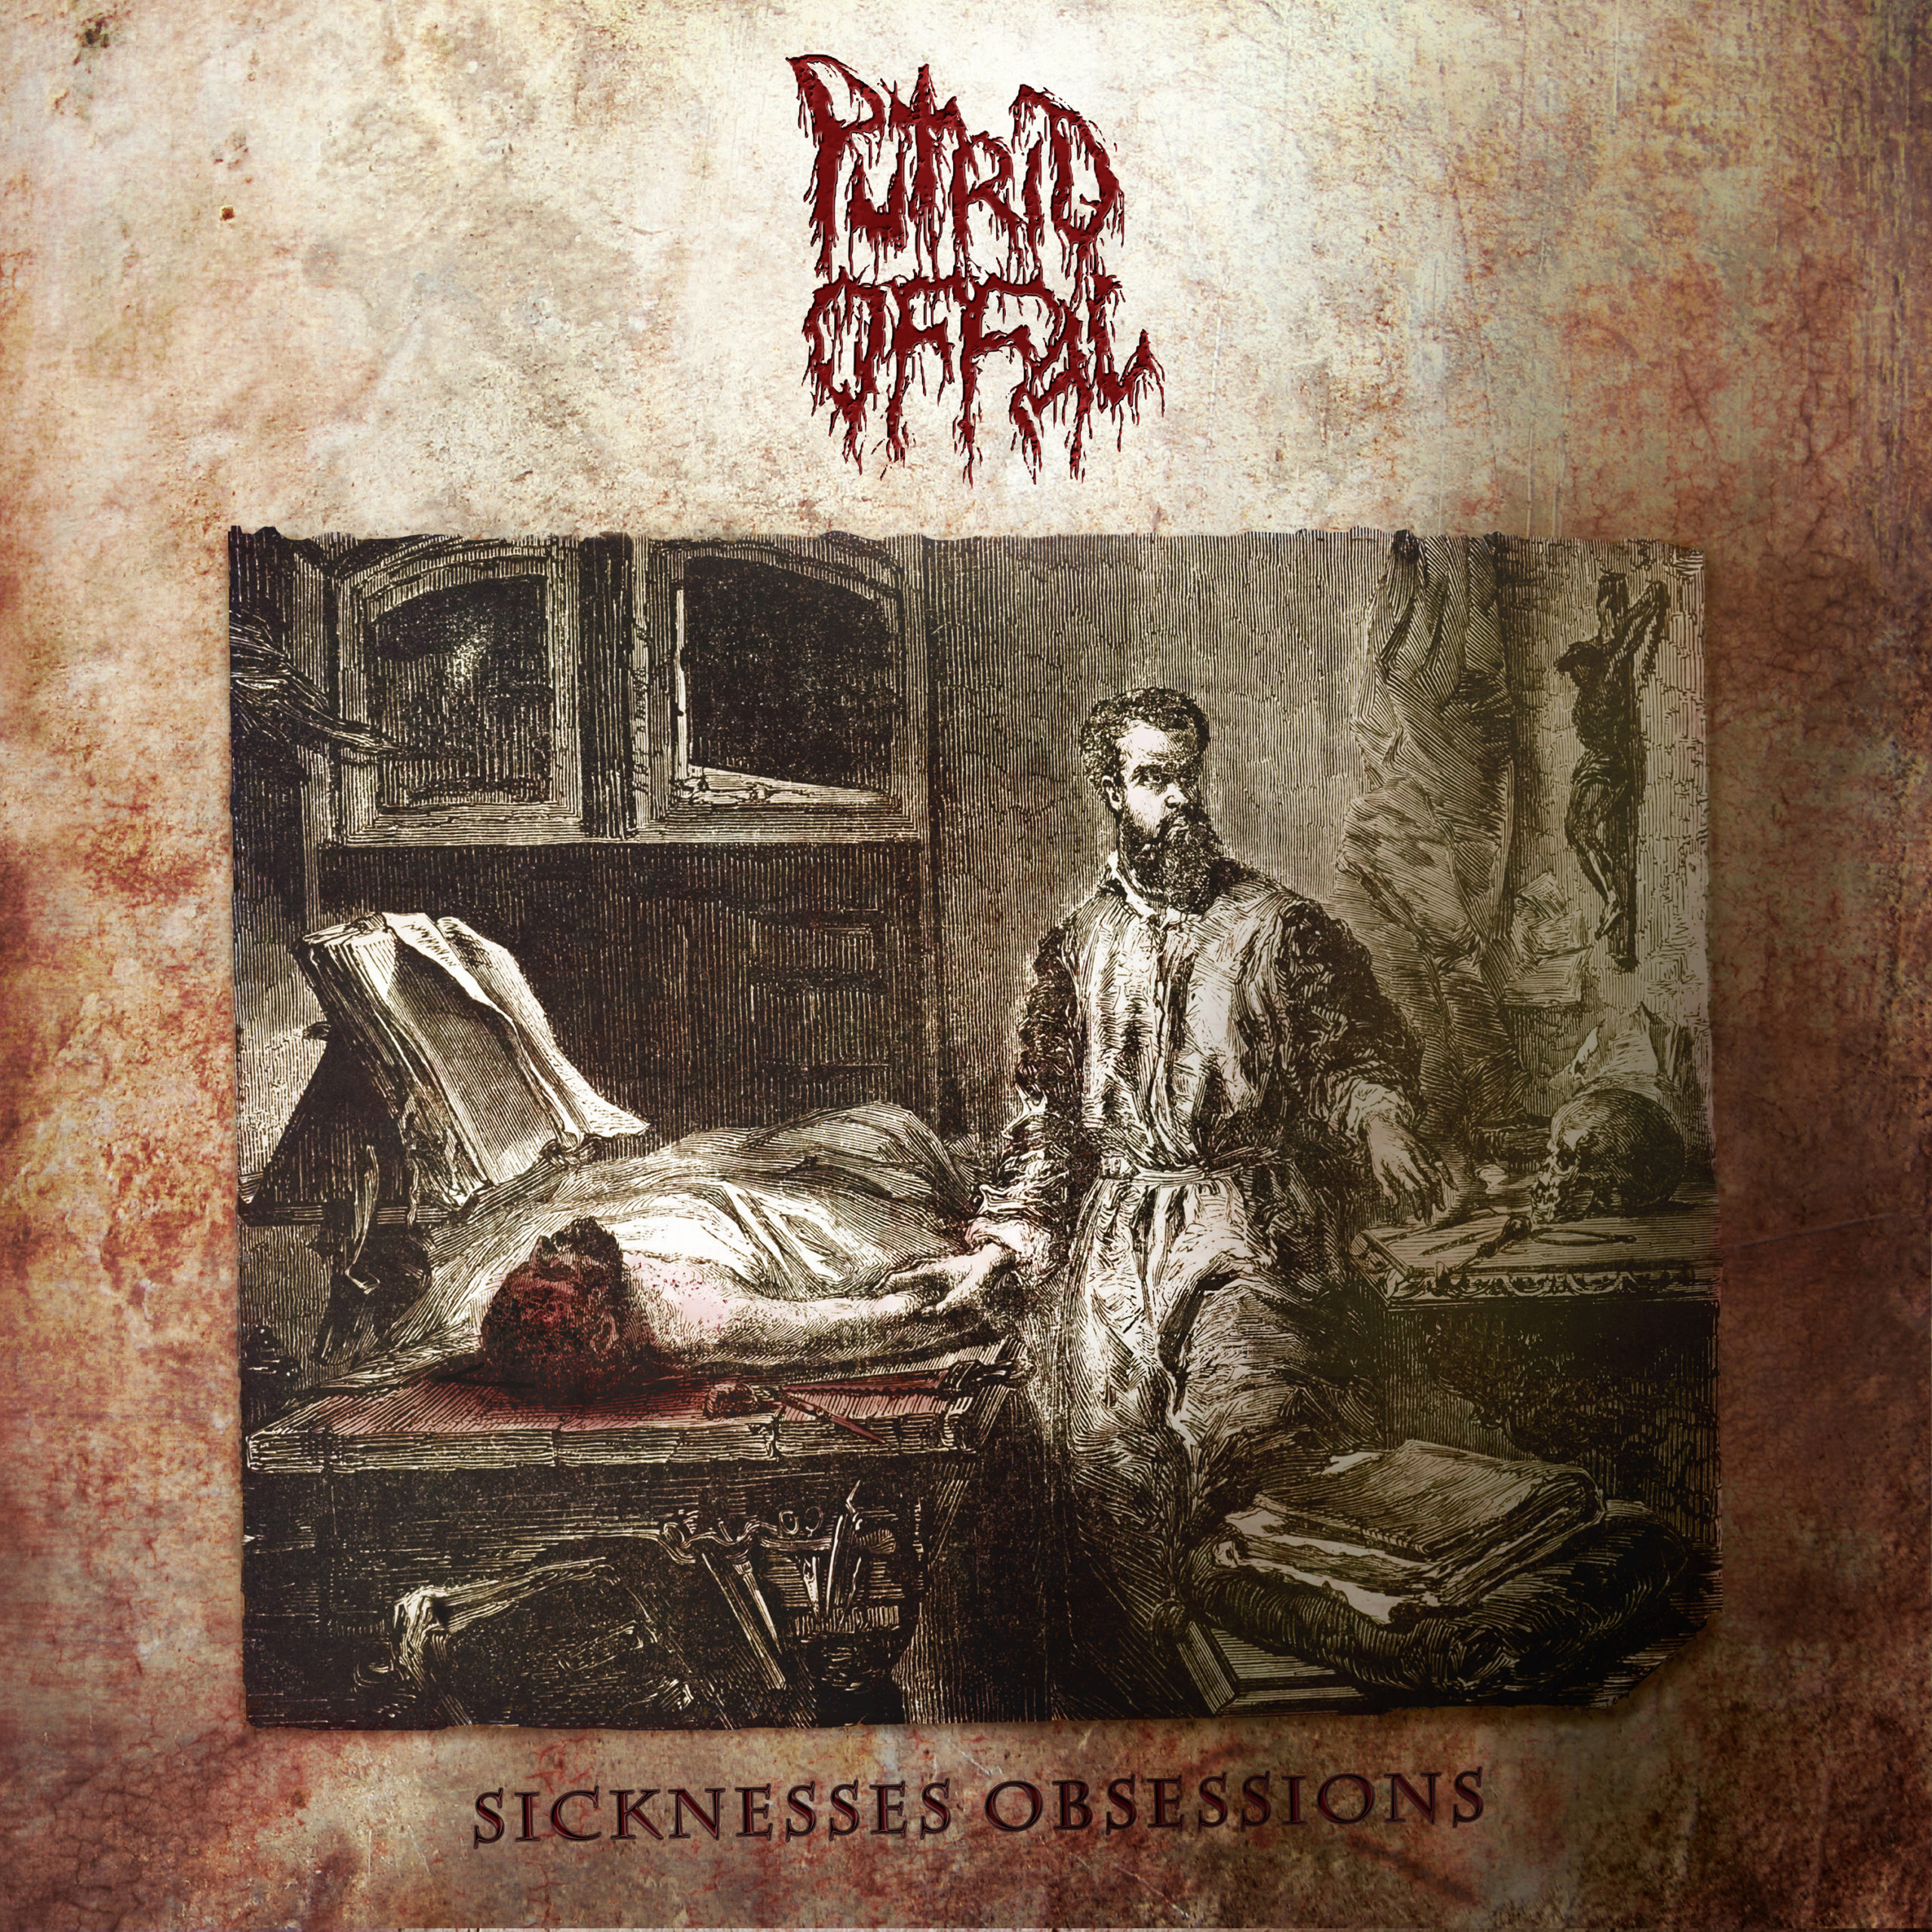 PUTRID OFFAL "Sicknesses Obsessions" [XKR029]